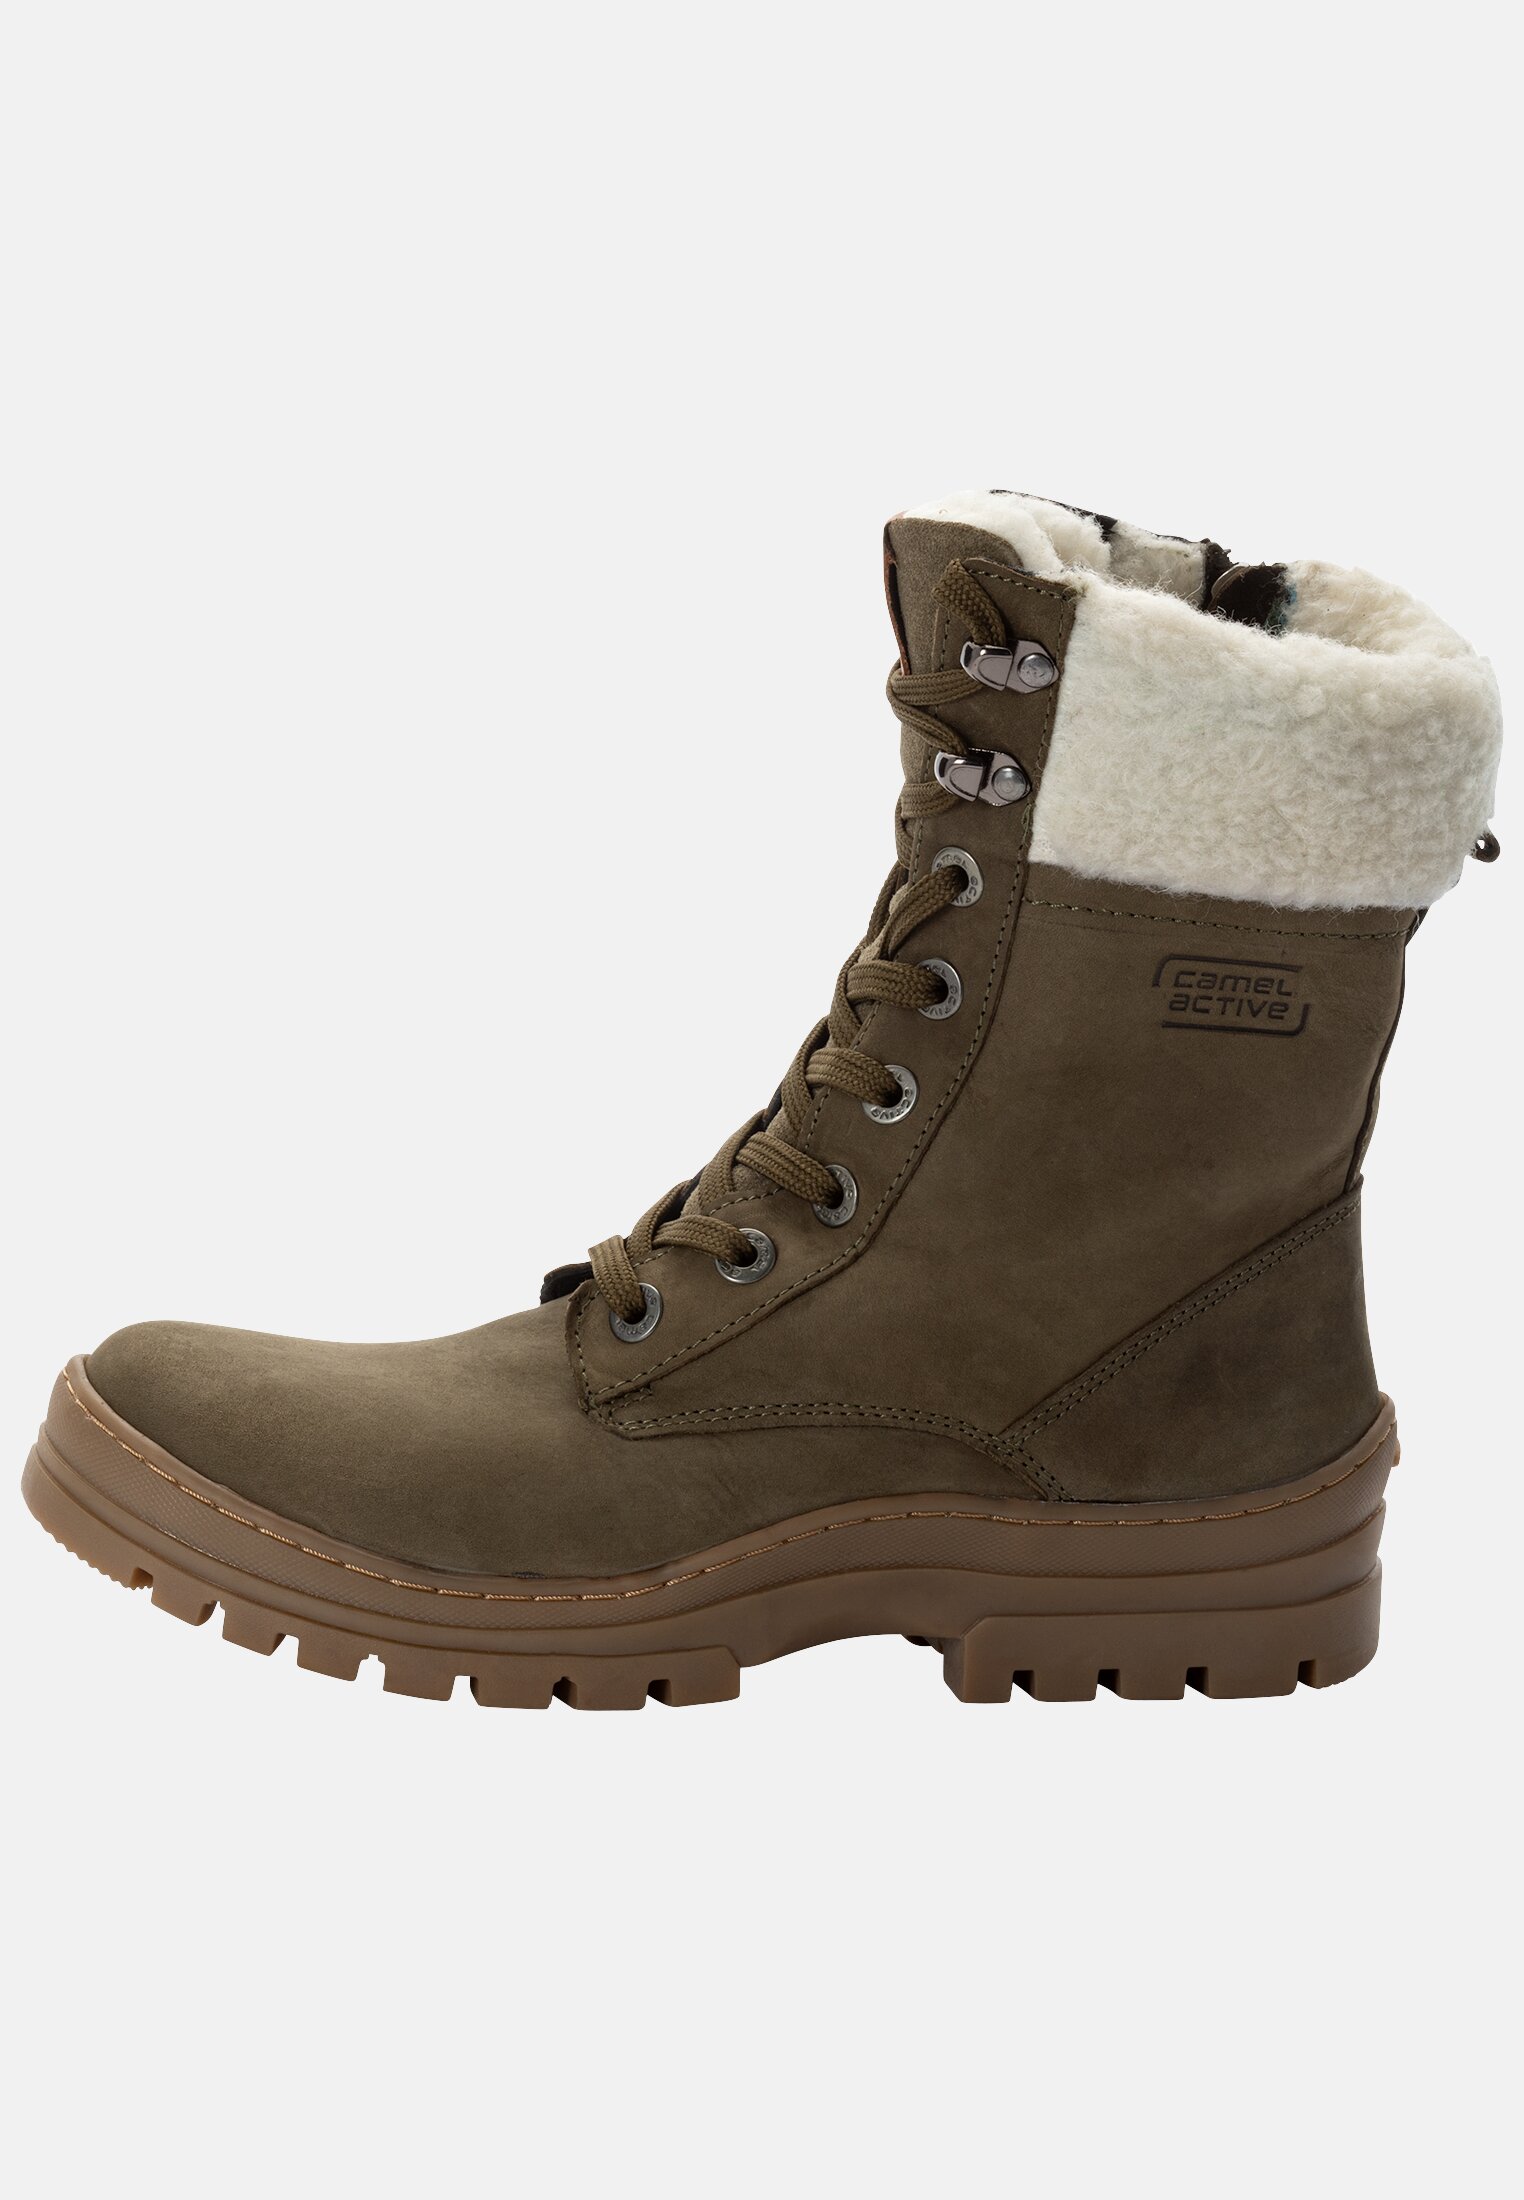 Camel Active Boots made from nubuck leather with warm wool lining